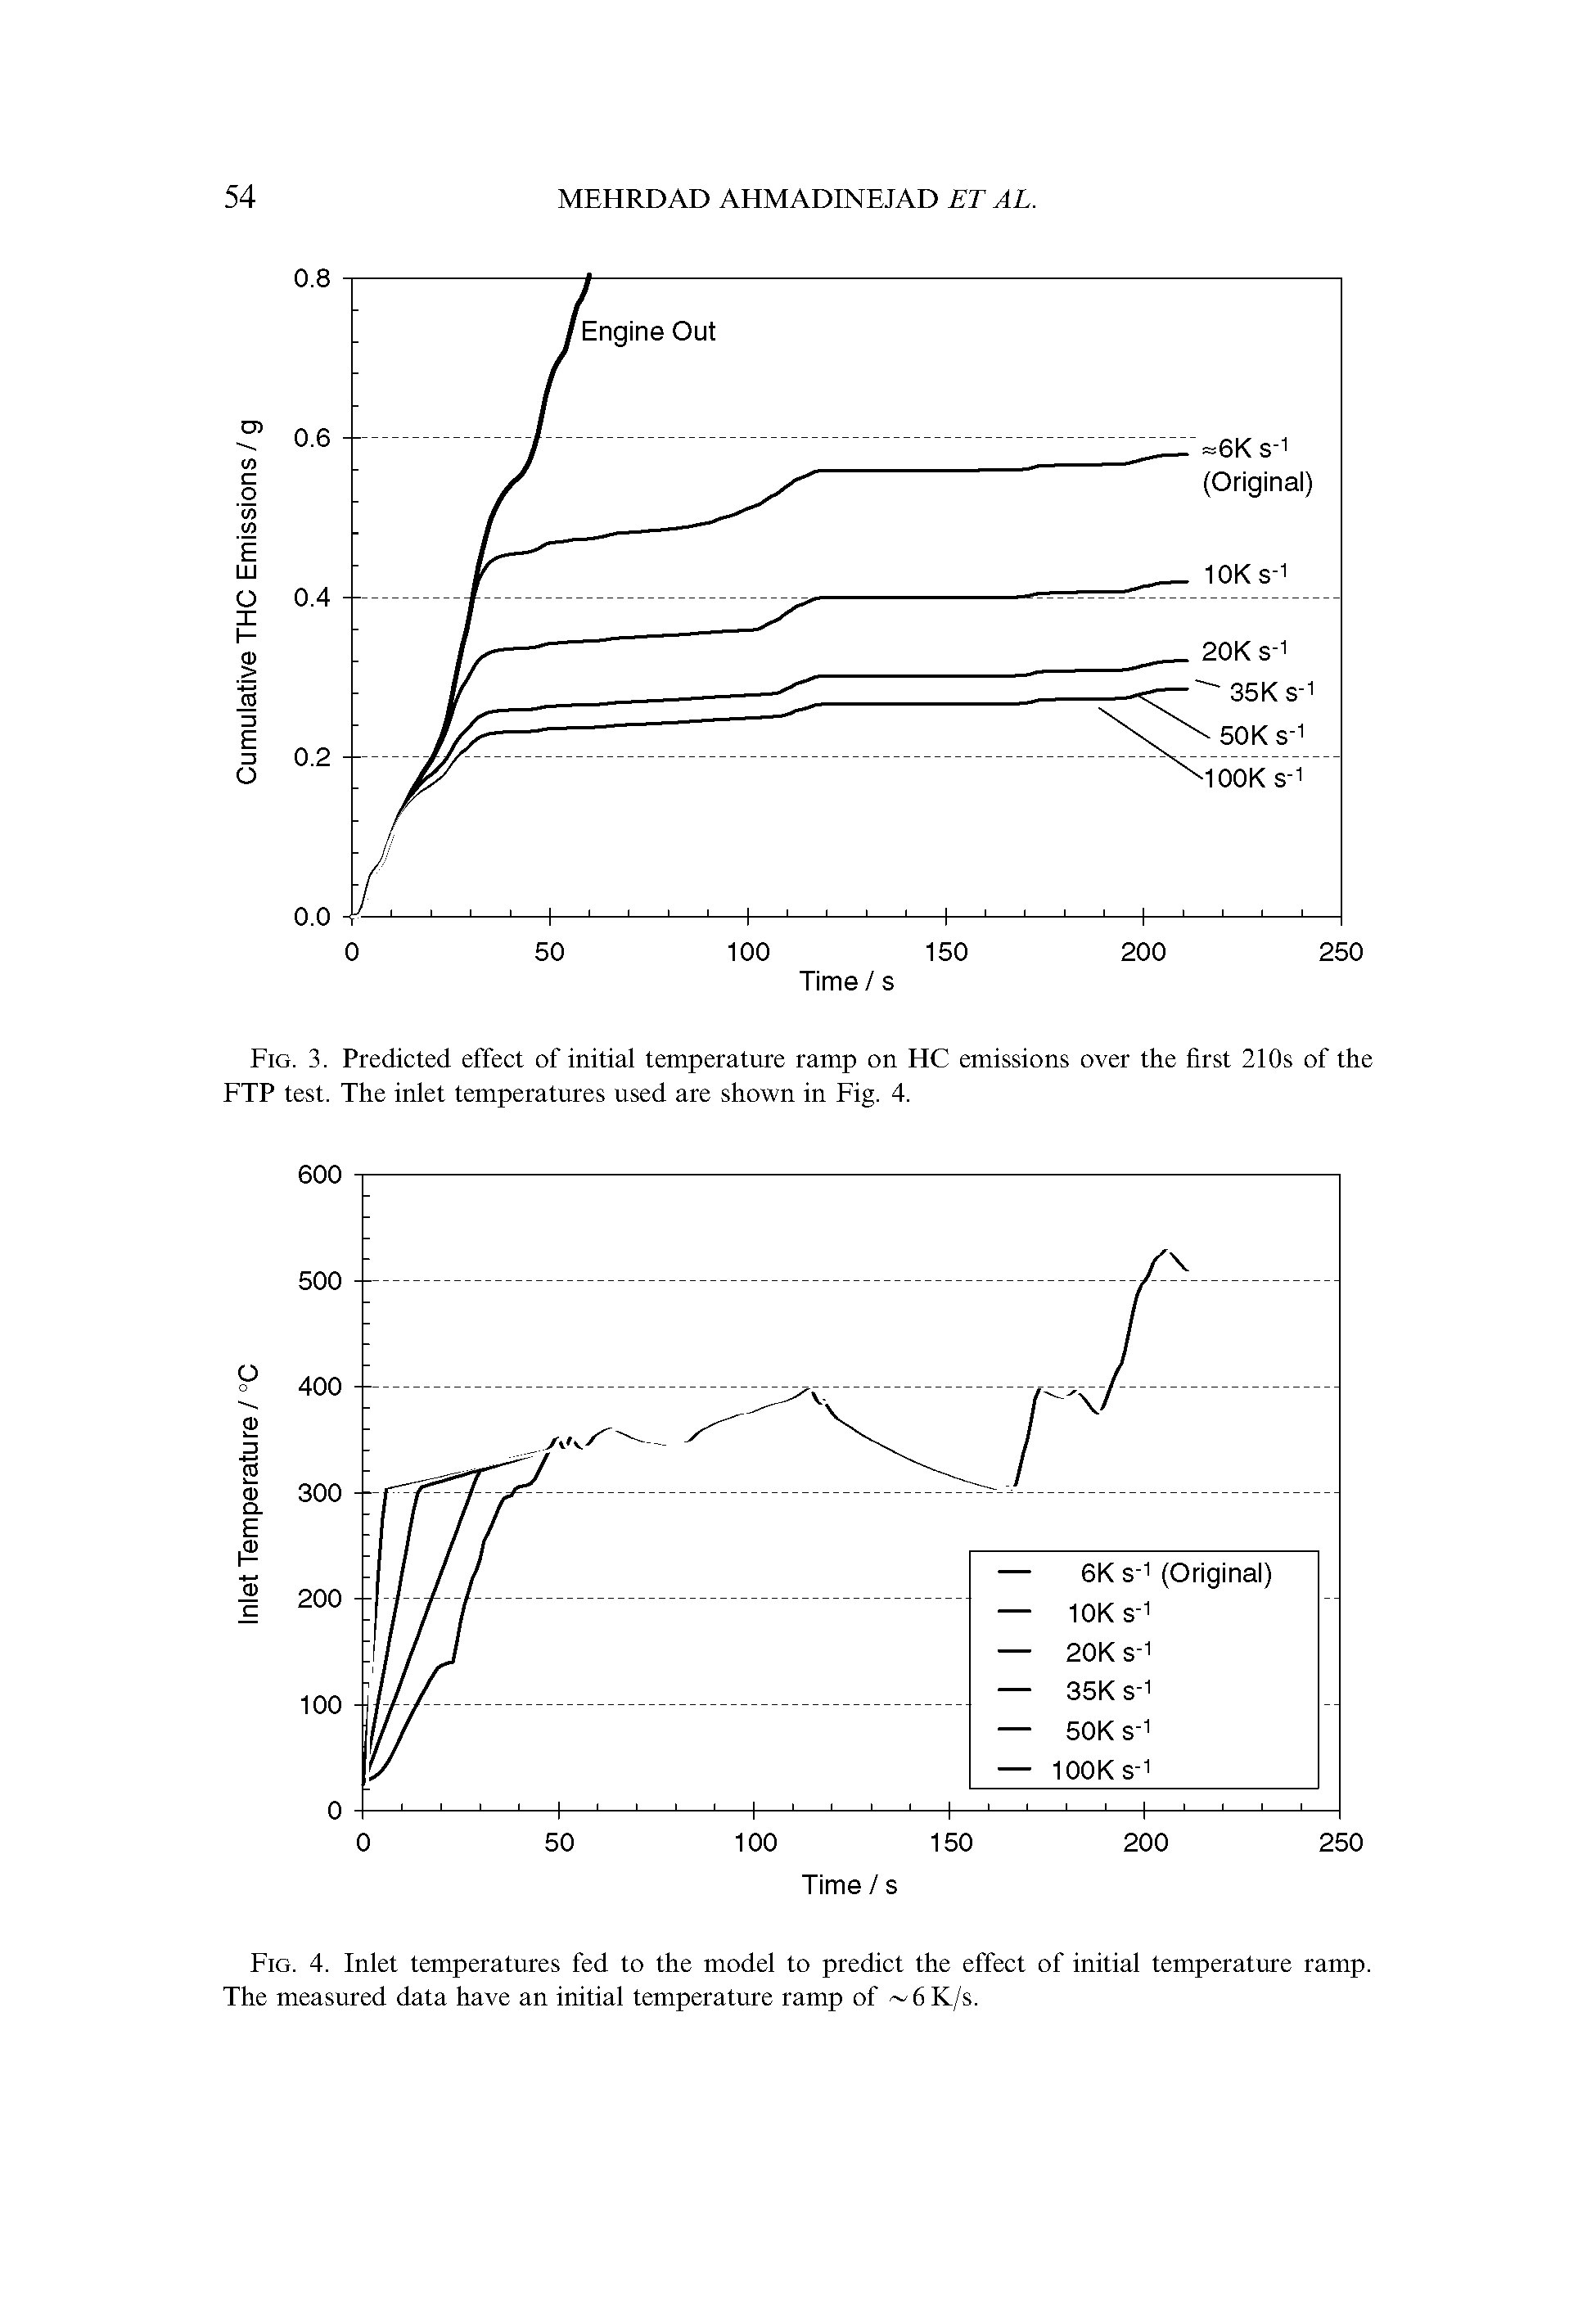 Fig. 3. Predicted effect of initial temperature ramp on HC emissions over the first 210s of the FTP test. The inlet temperatures used are shown in Fig. 4.